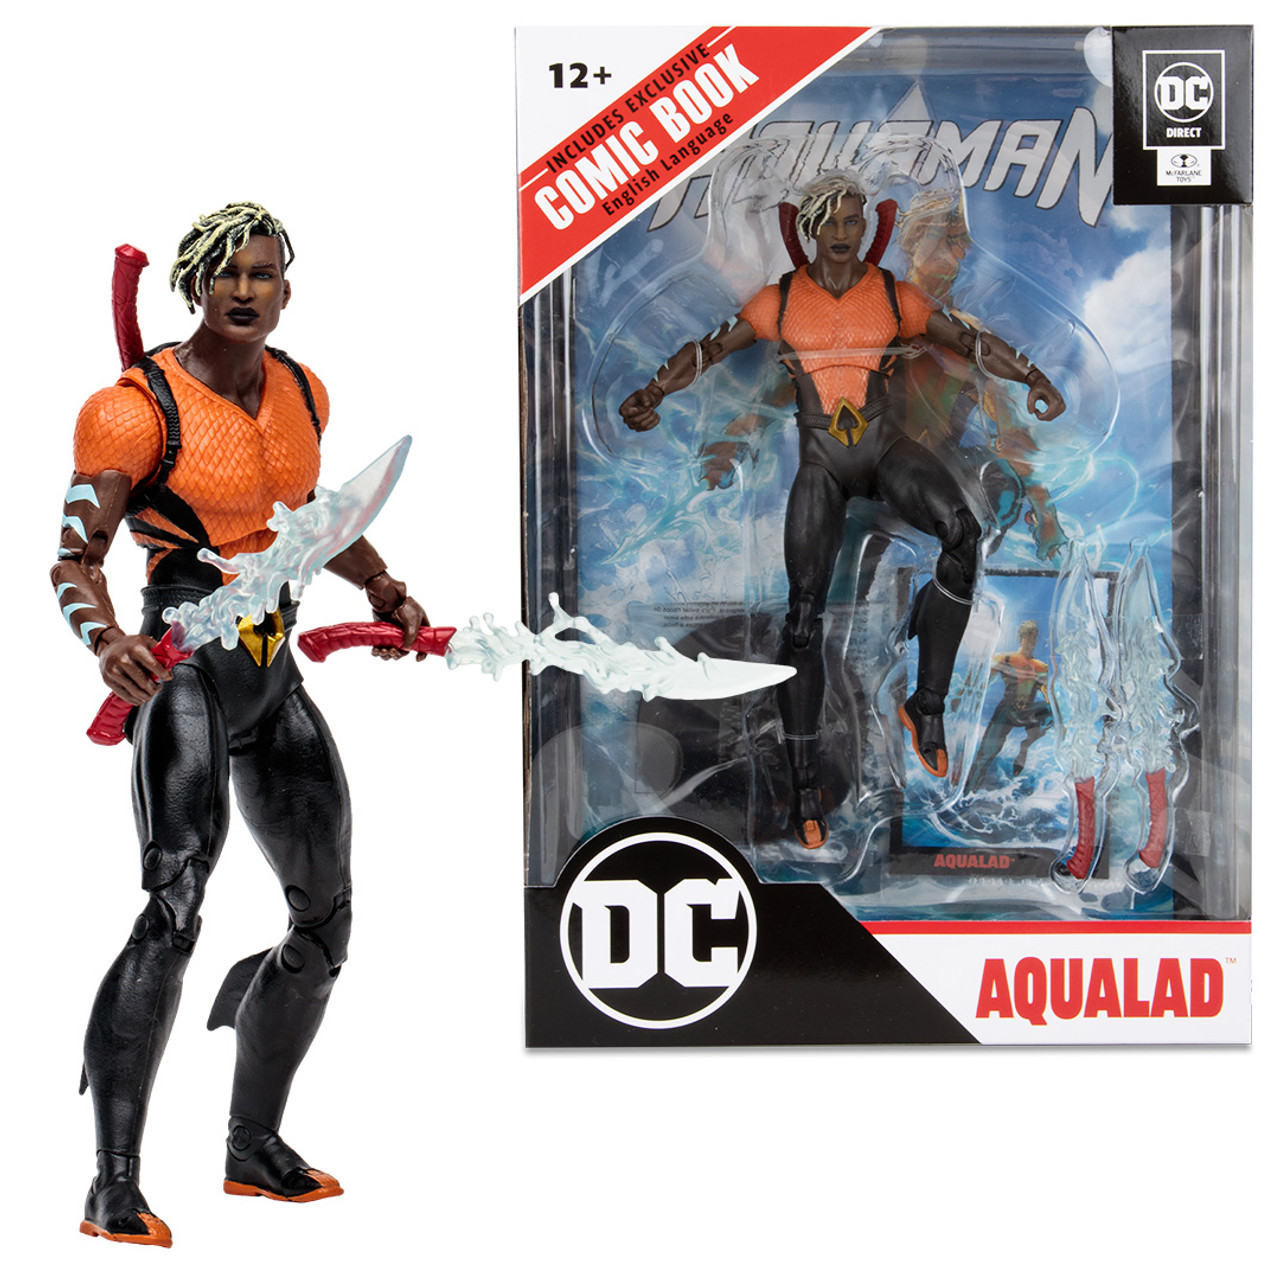 McFarlane Toys - Another wave of Page Punchers is here! Aquaman 7 scale  figure from the brand new Aquaman comic is available for pre-order NOW at  select retailers! ➡️  Includes a